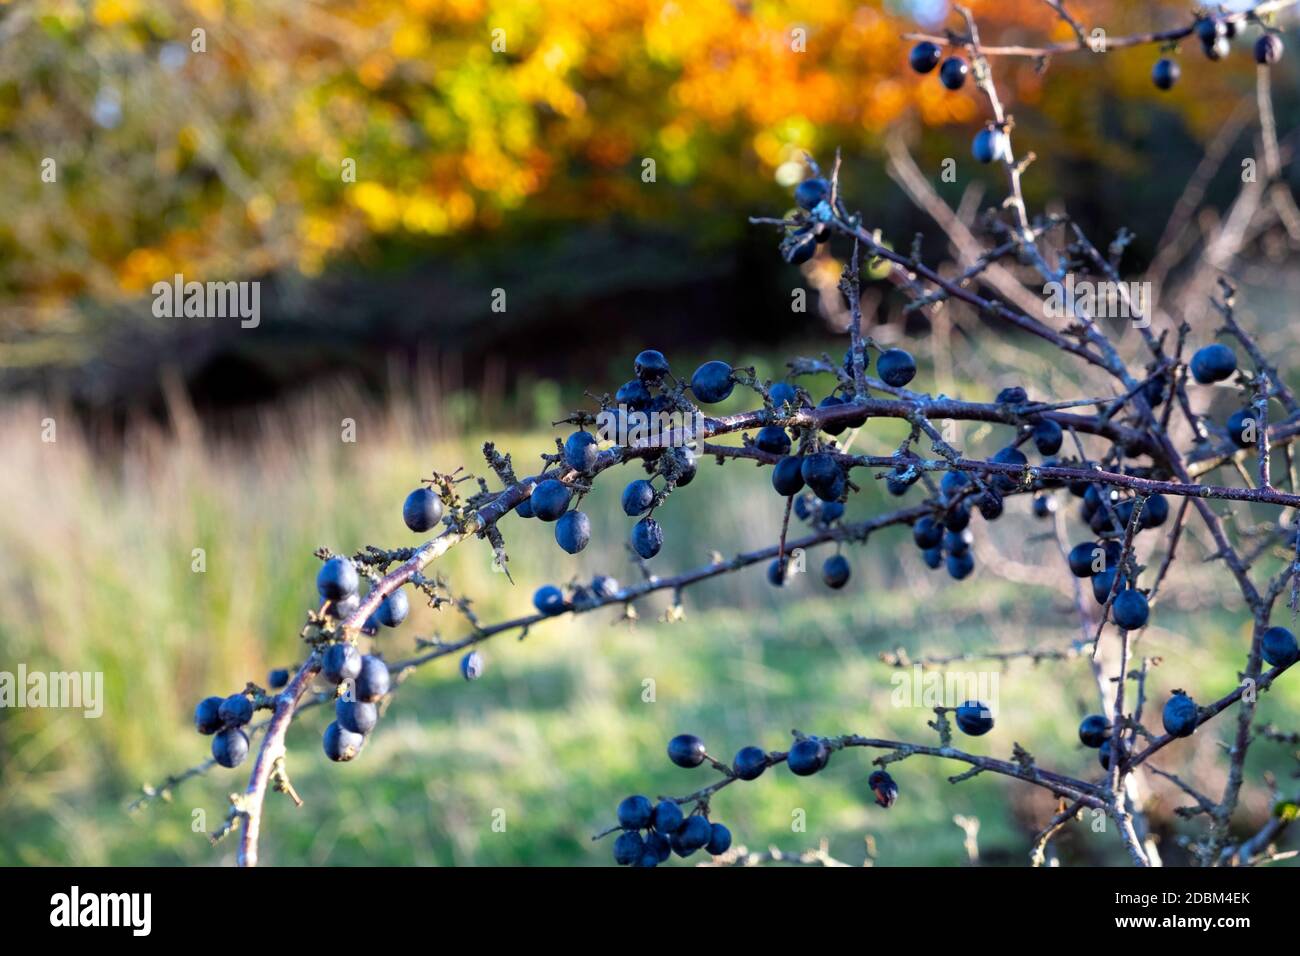 Sloes wild blue sloe berries sloes ready for picking on thorny shrub tree in the Dyfed Carmarthenshire countryside Wales UK Britain 2020  KATHY DEWITT Stock Photo